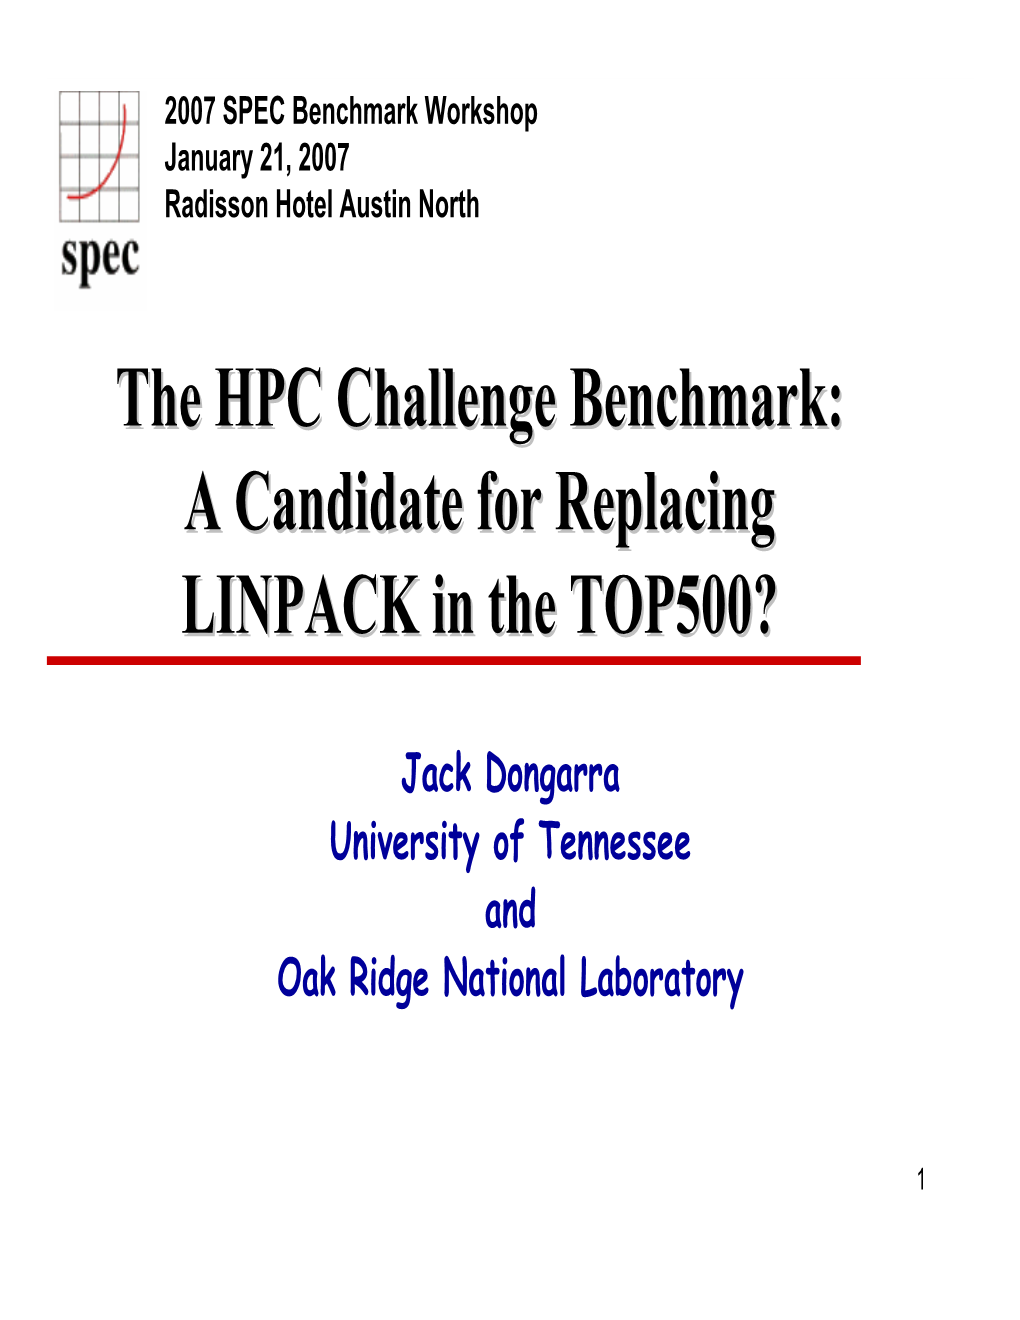 The HPC Challenge Benchmark: a Candidate for Replacing LINPACK